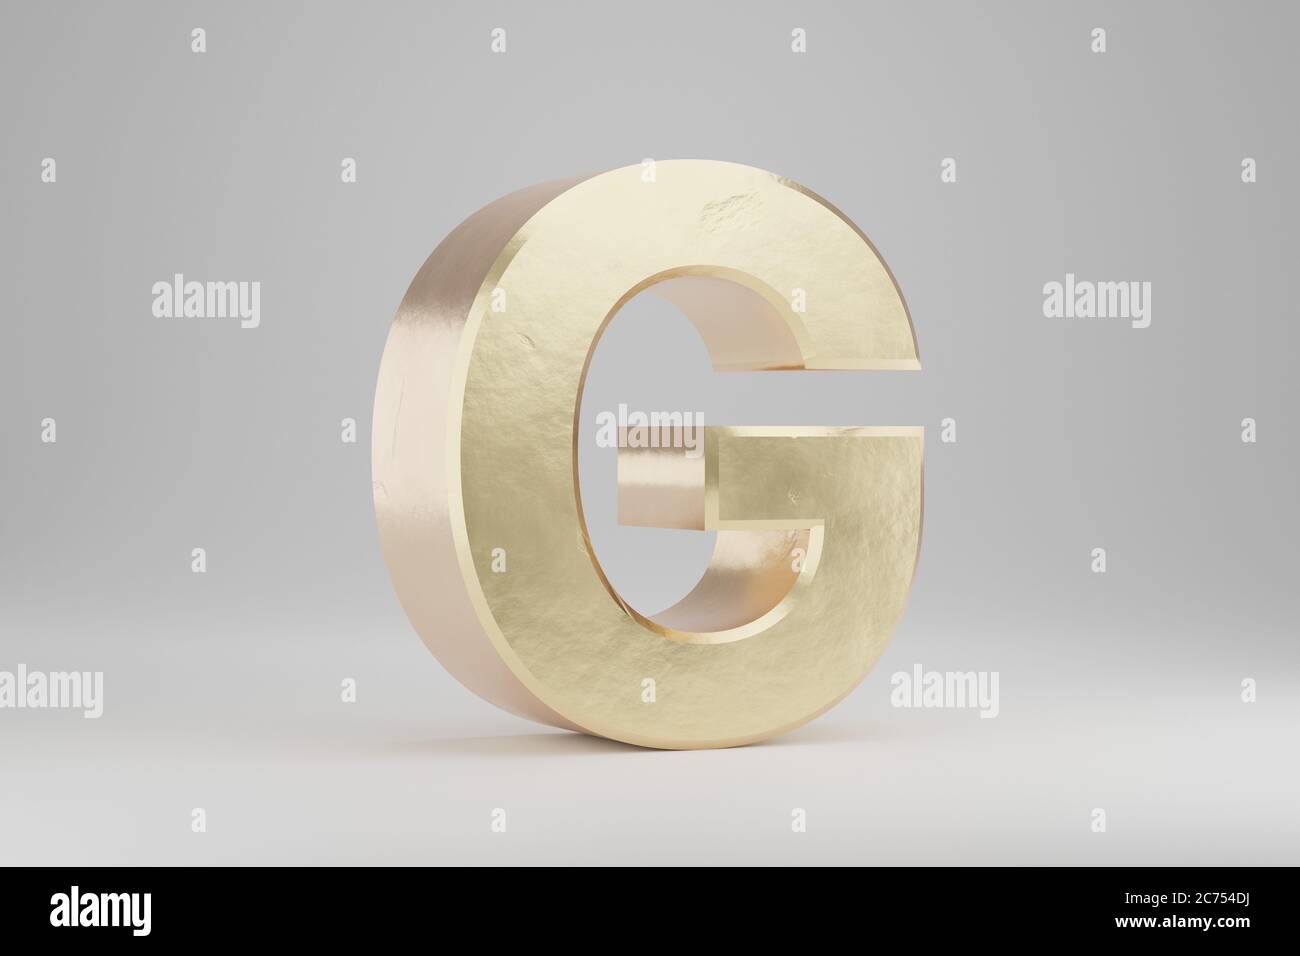 Gold 3d letter G uppercase. Golden letter isolated on white background. Golden alphabet with imperfections. 3d rendered font character. Stock Photo